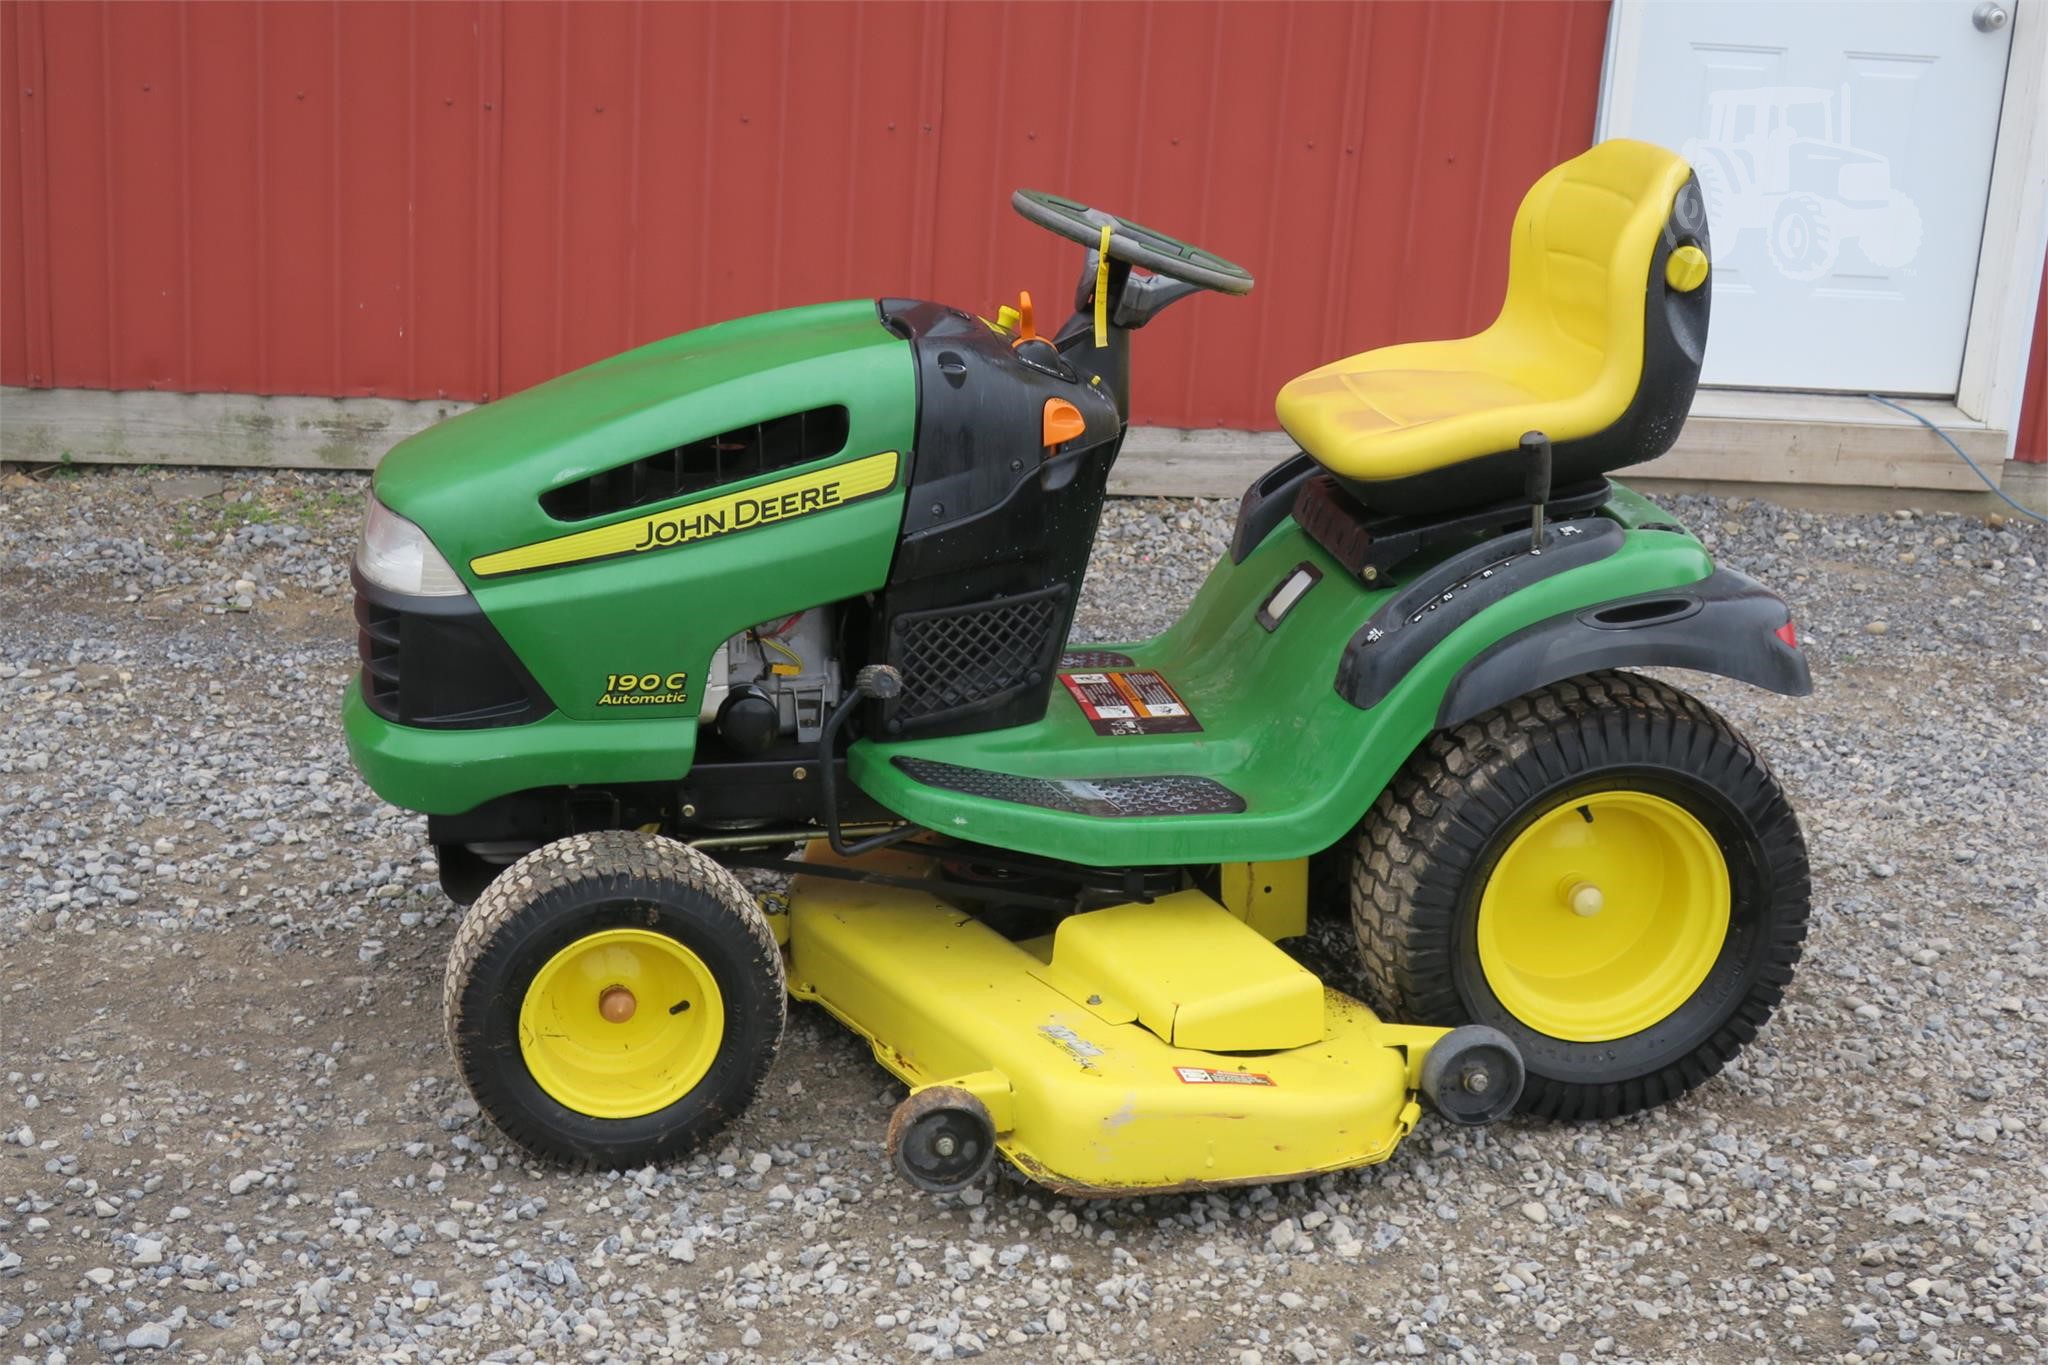 John Deere 190 For Sale 1 Listings Tractorhouse Com Page 1 Of 1